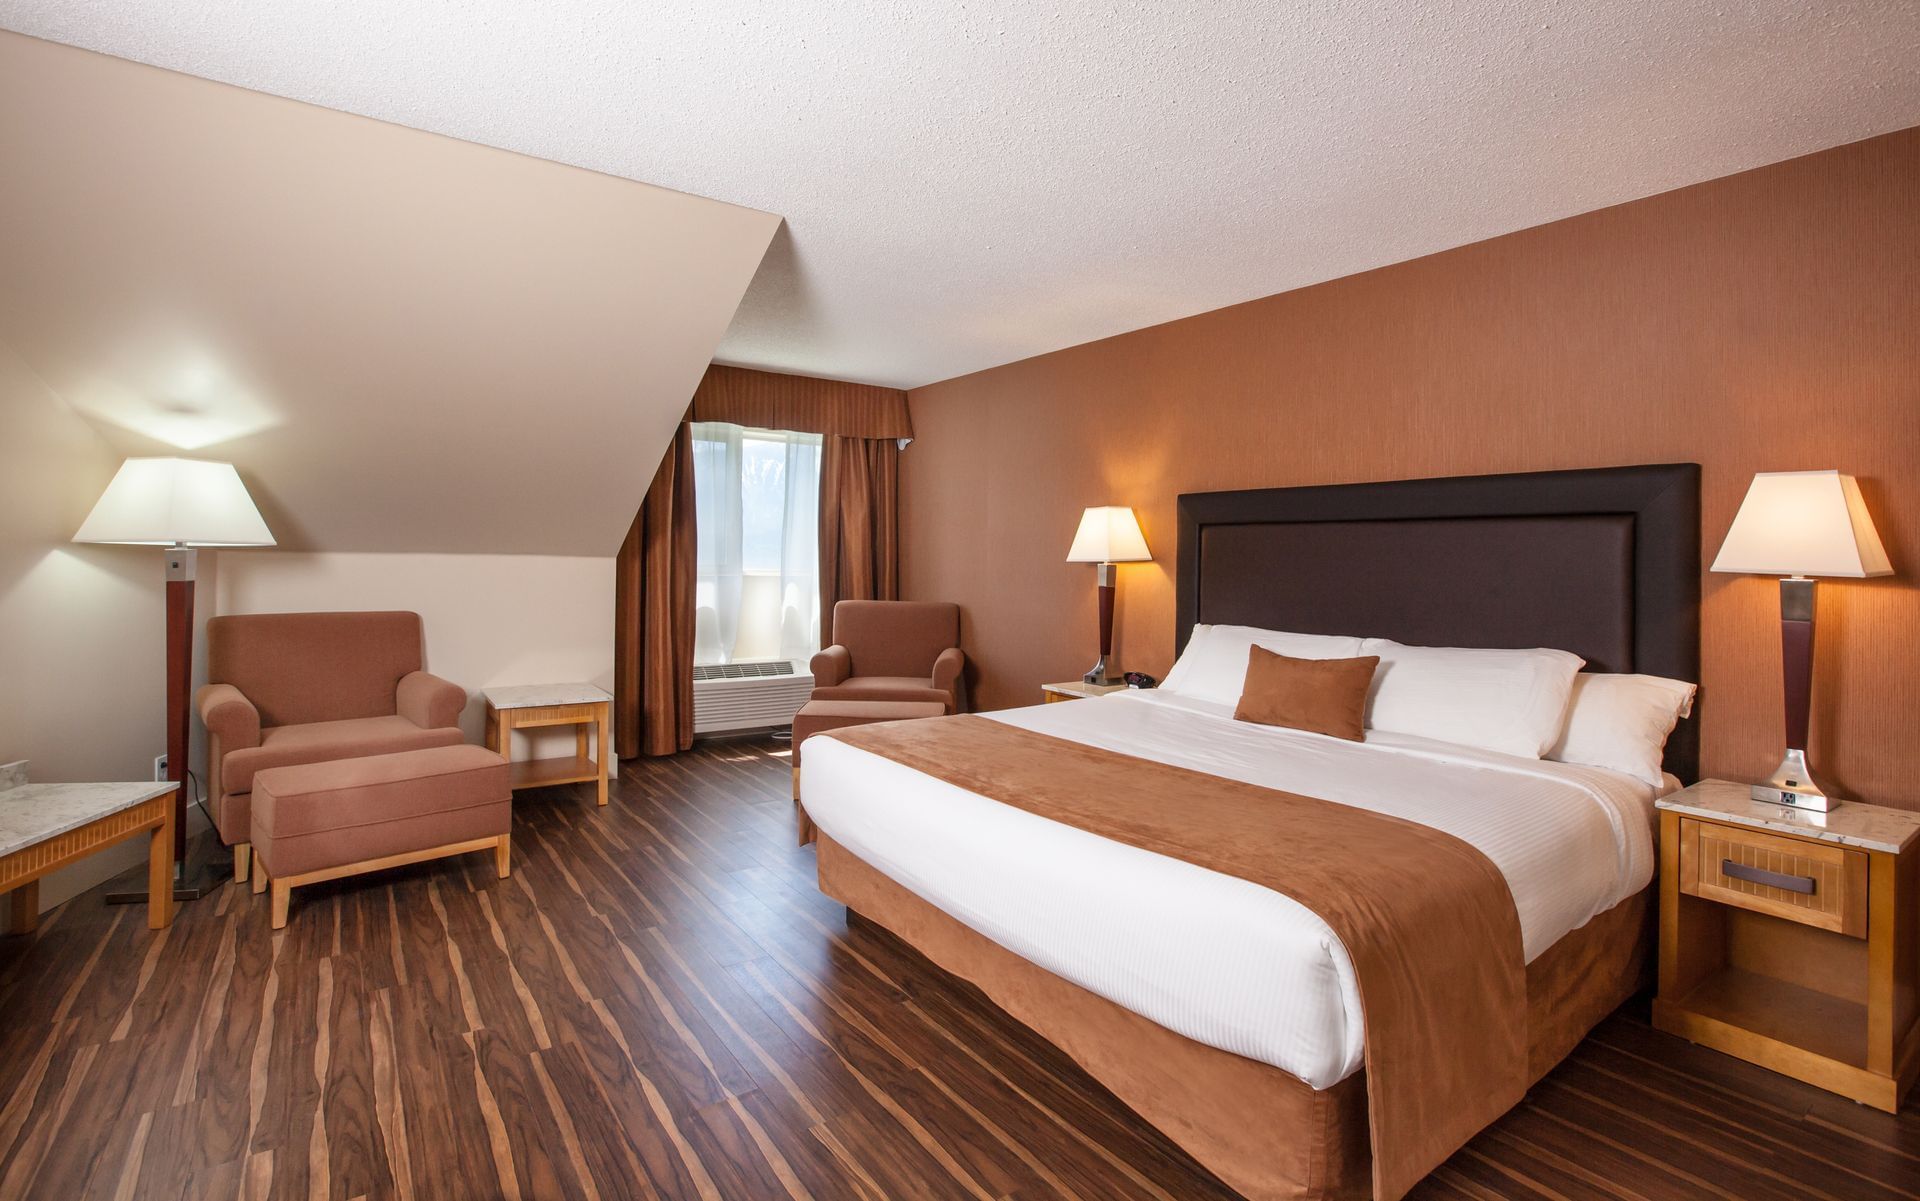 Bed in hotel room with wooden floors